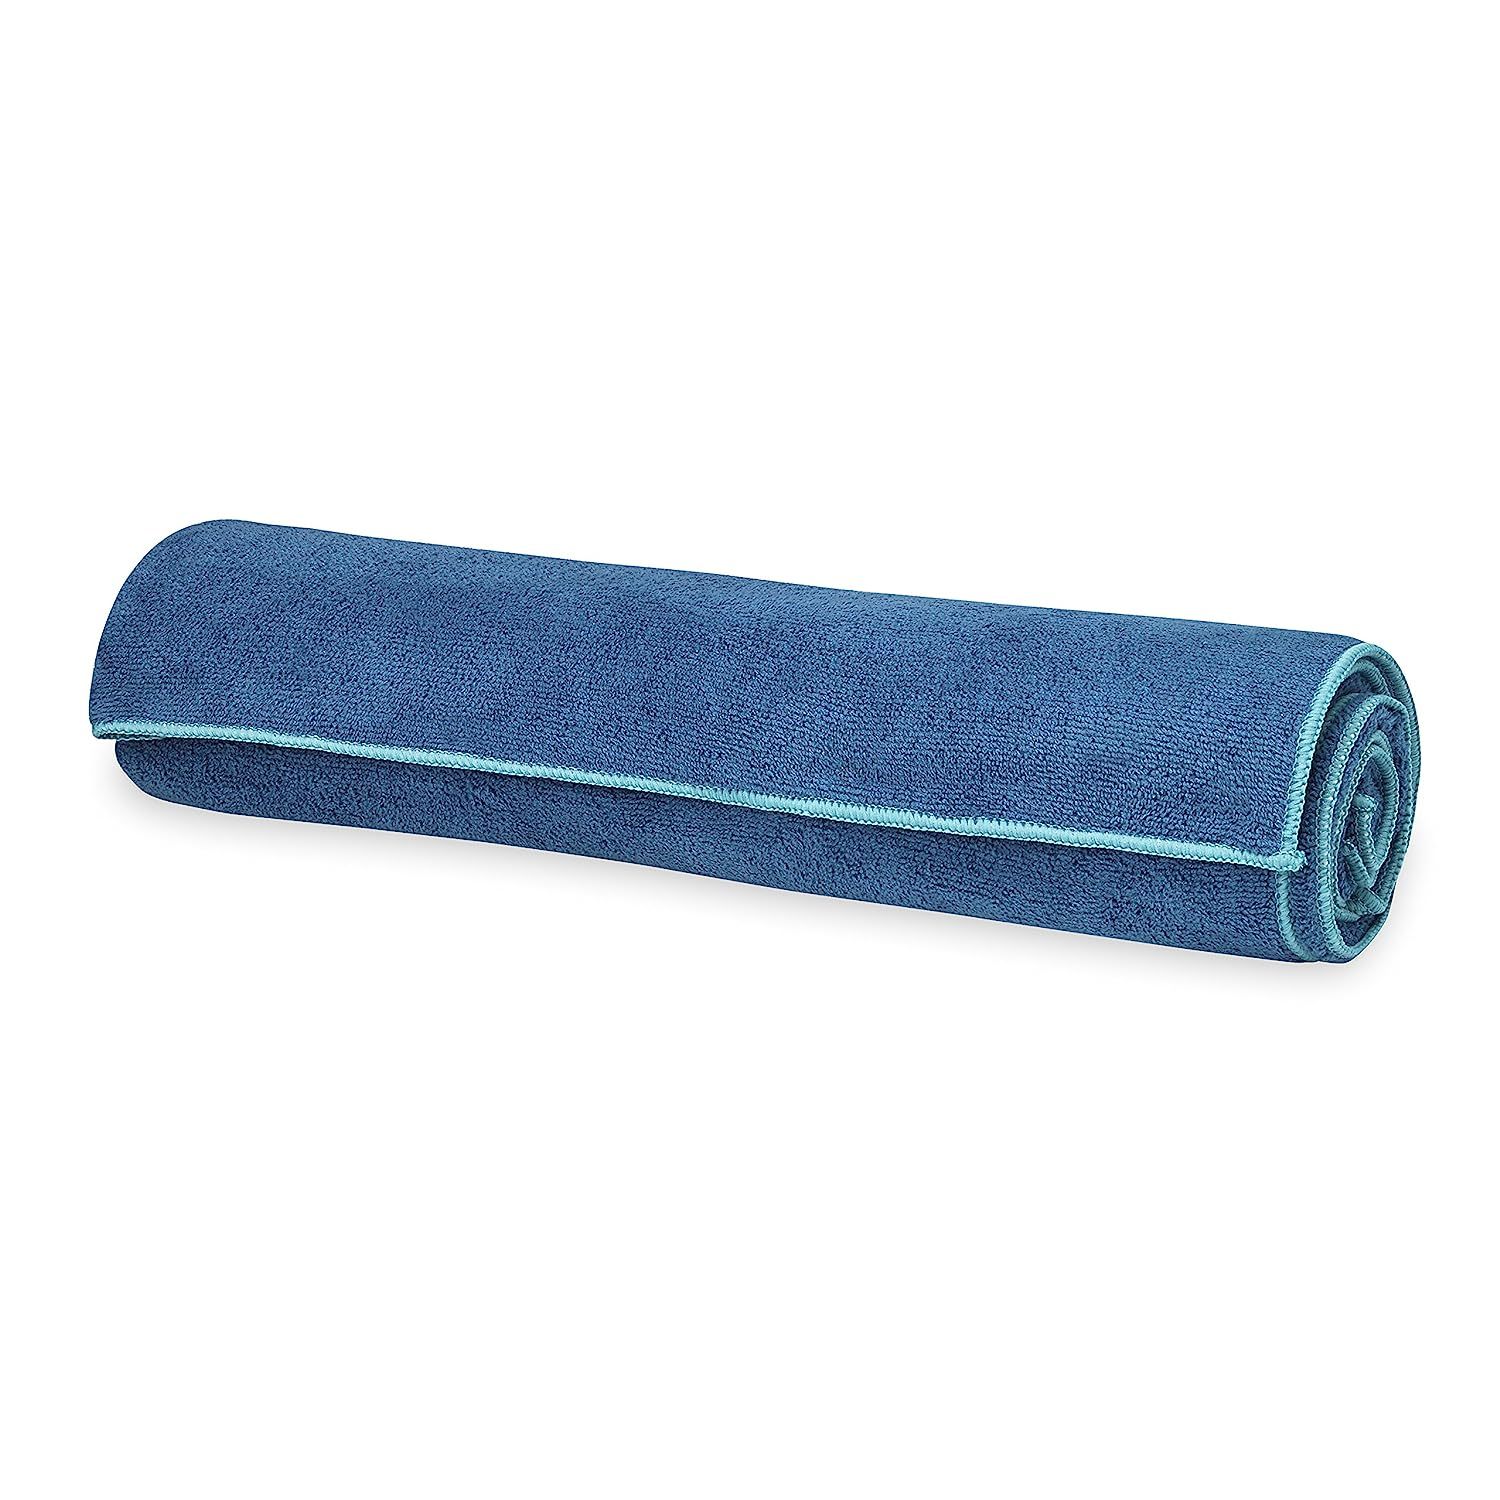  Gaiam Yoga Mat Band (Sold Individually with